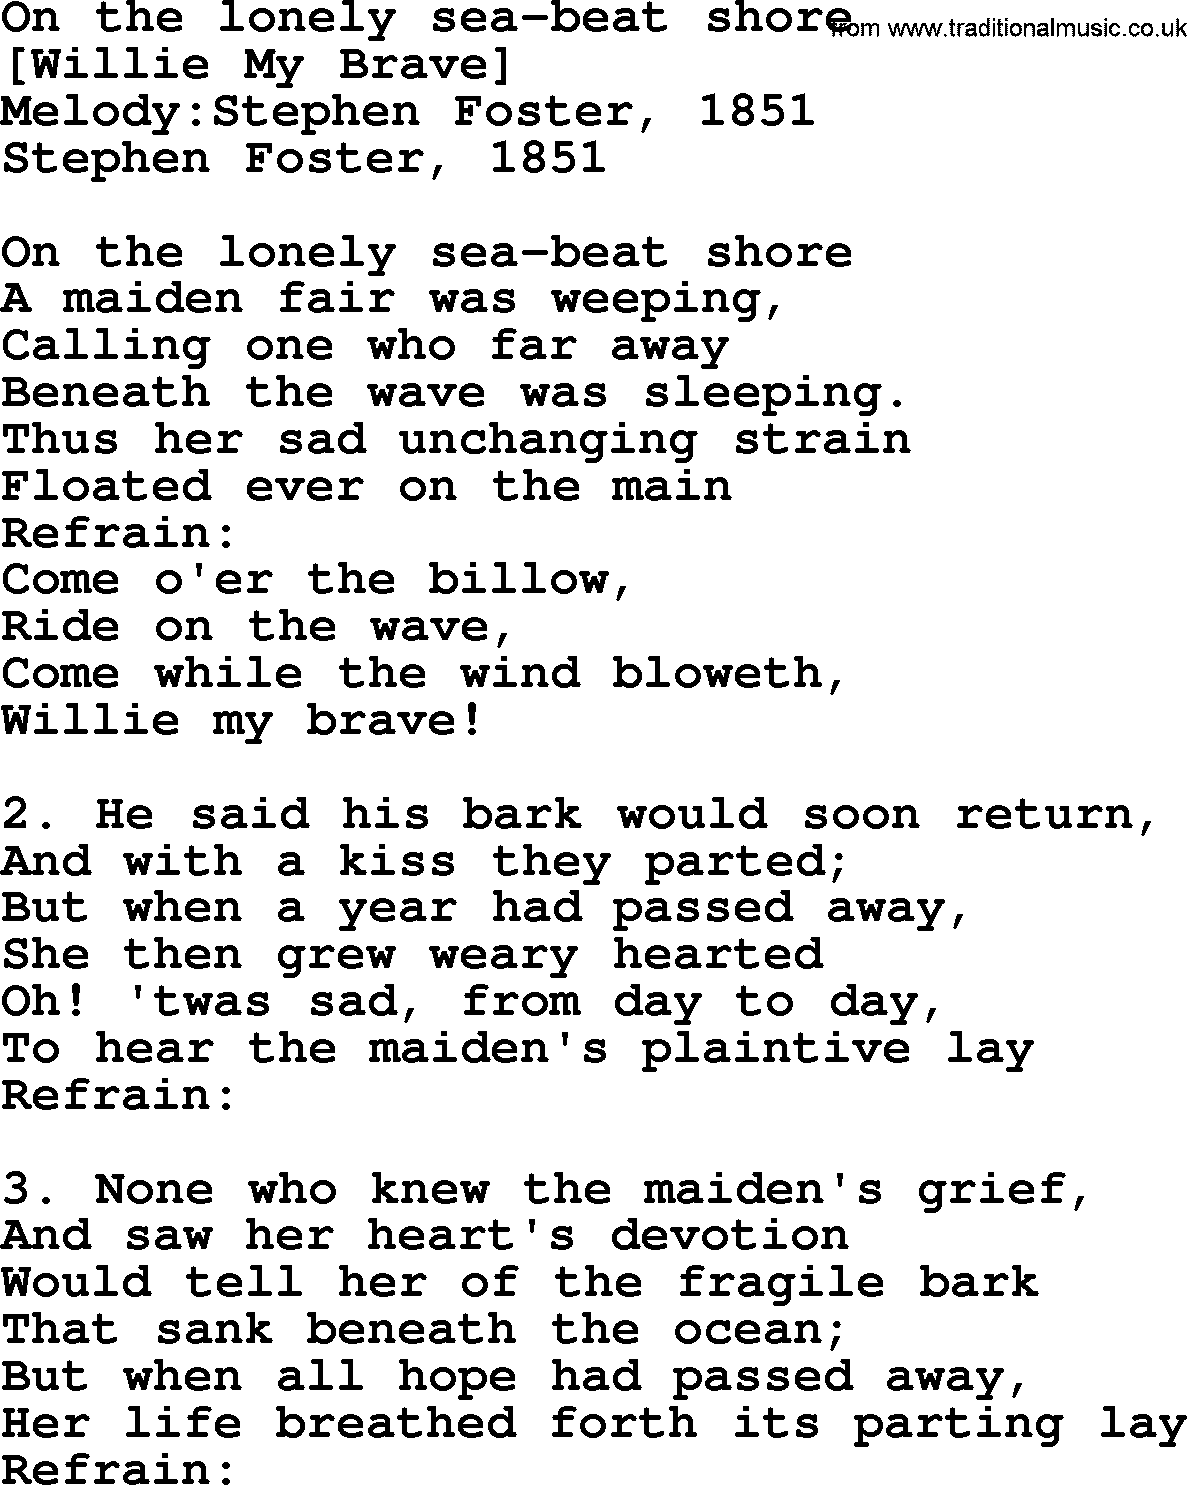 Old American Song: On The Lonely Sea-Beat Shore, lyrics